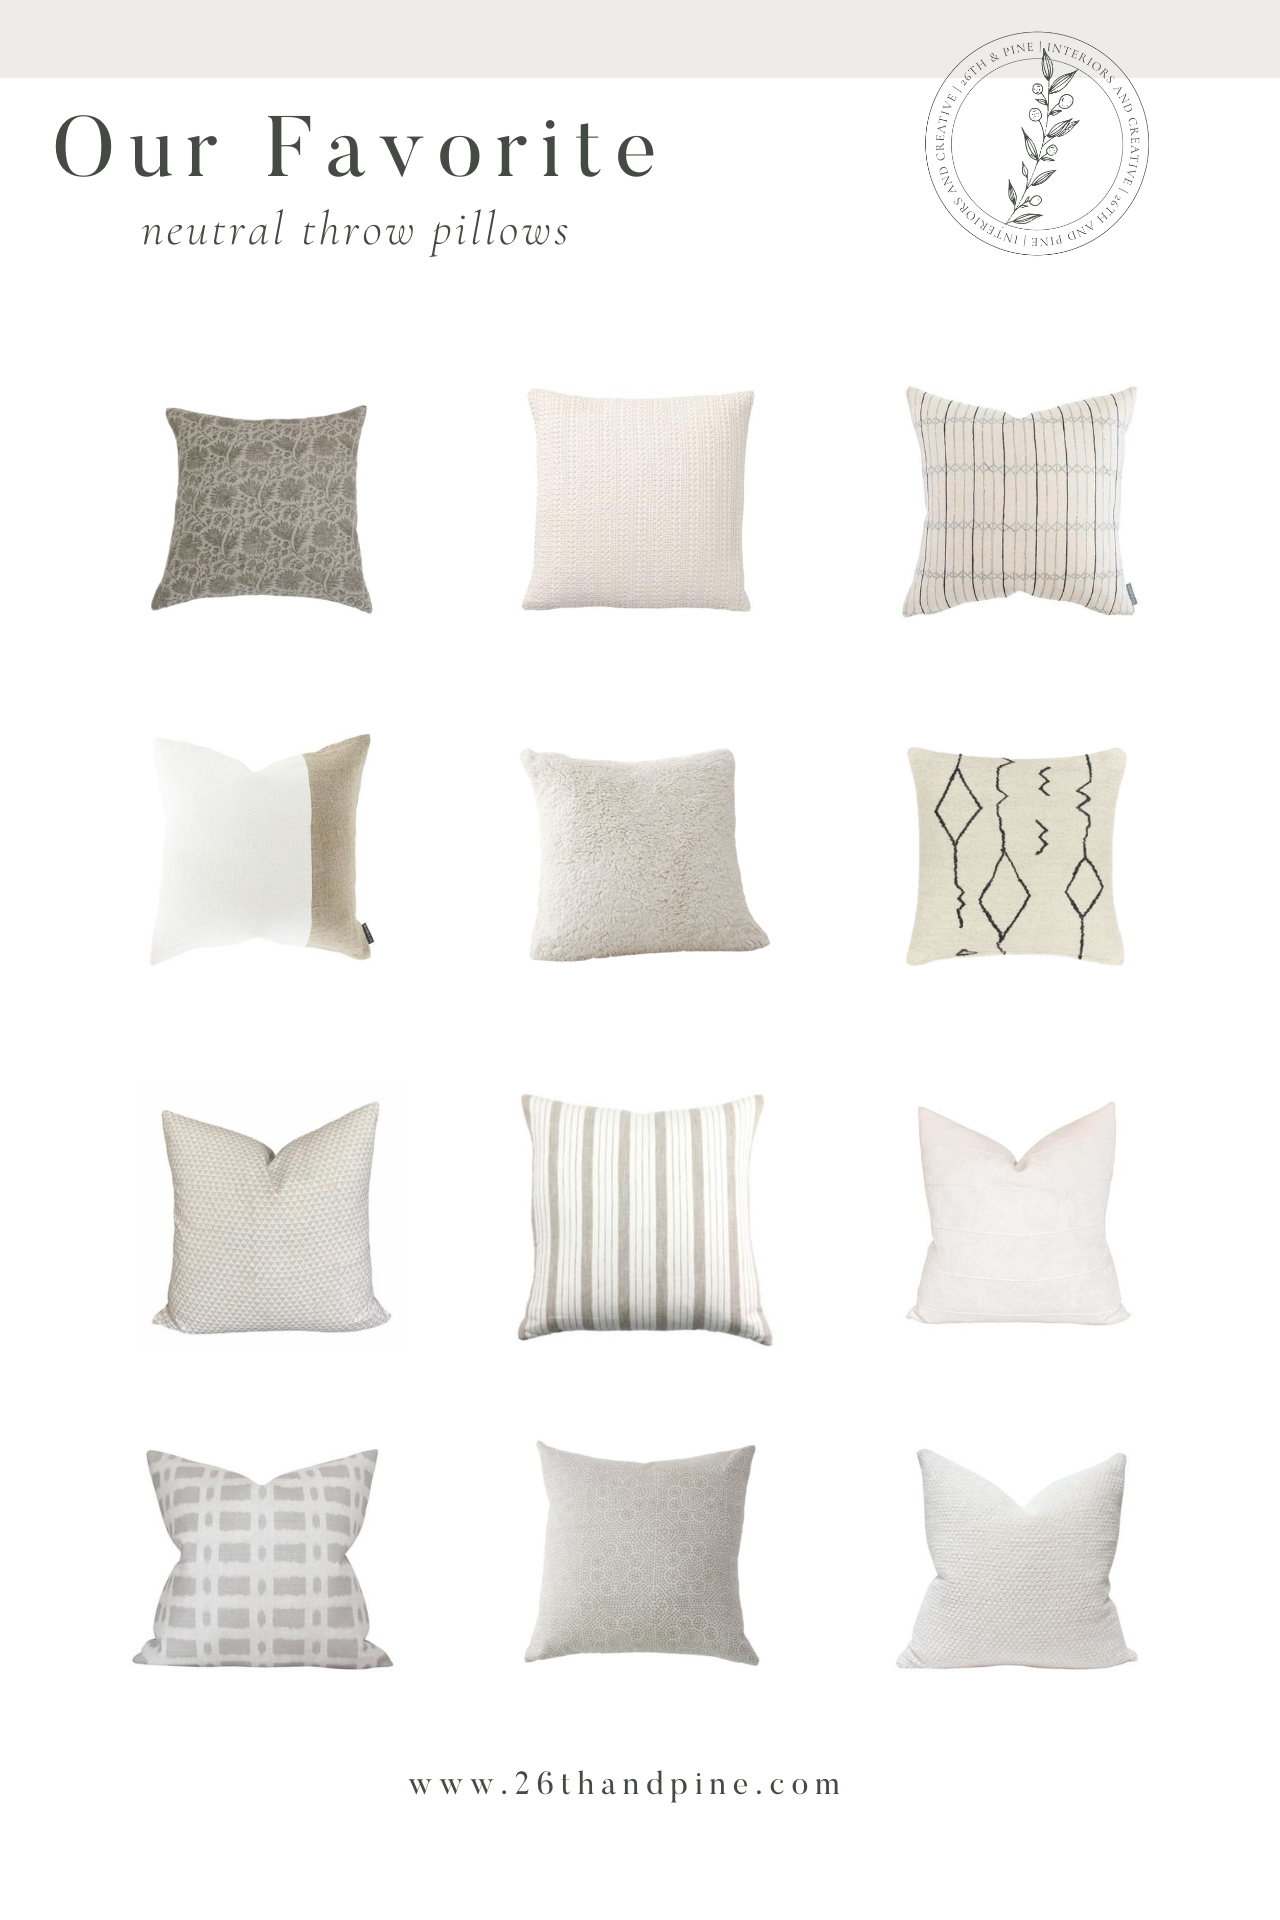 12 Different Neutral Throw Pillows with variety of patterns and textures.